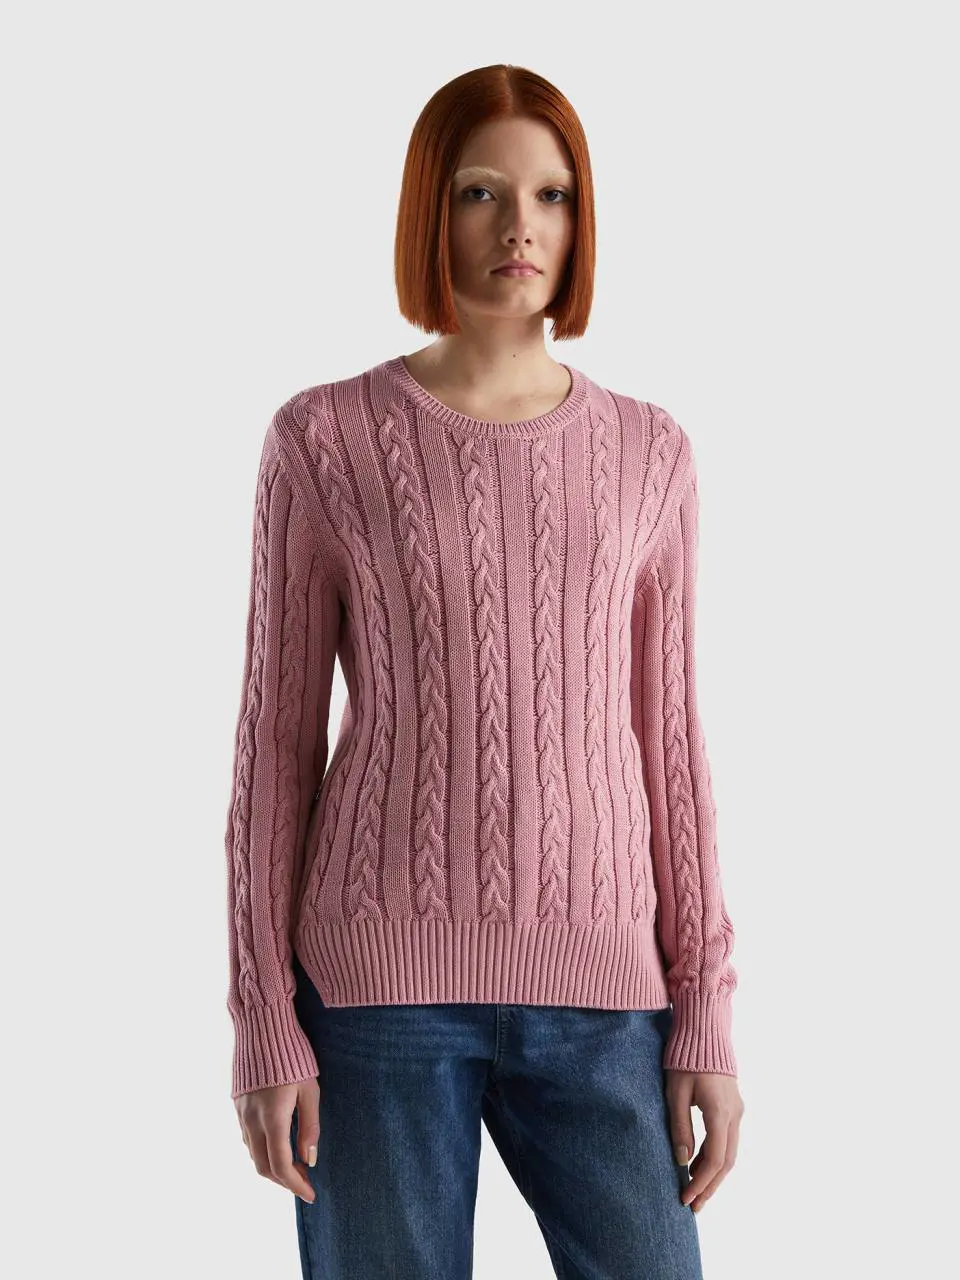 Benetton cable knit sweater 100% cotton. 1